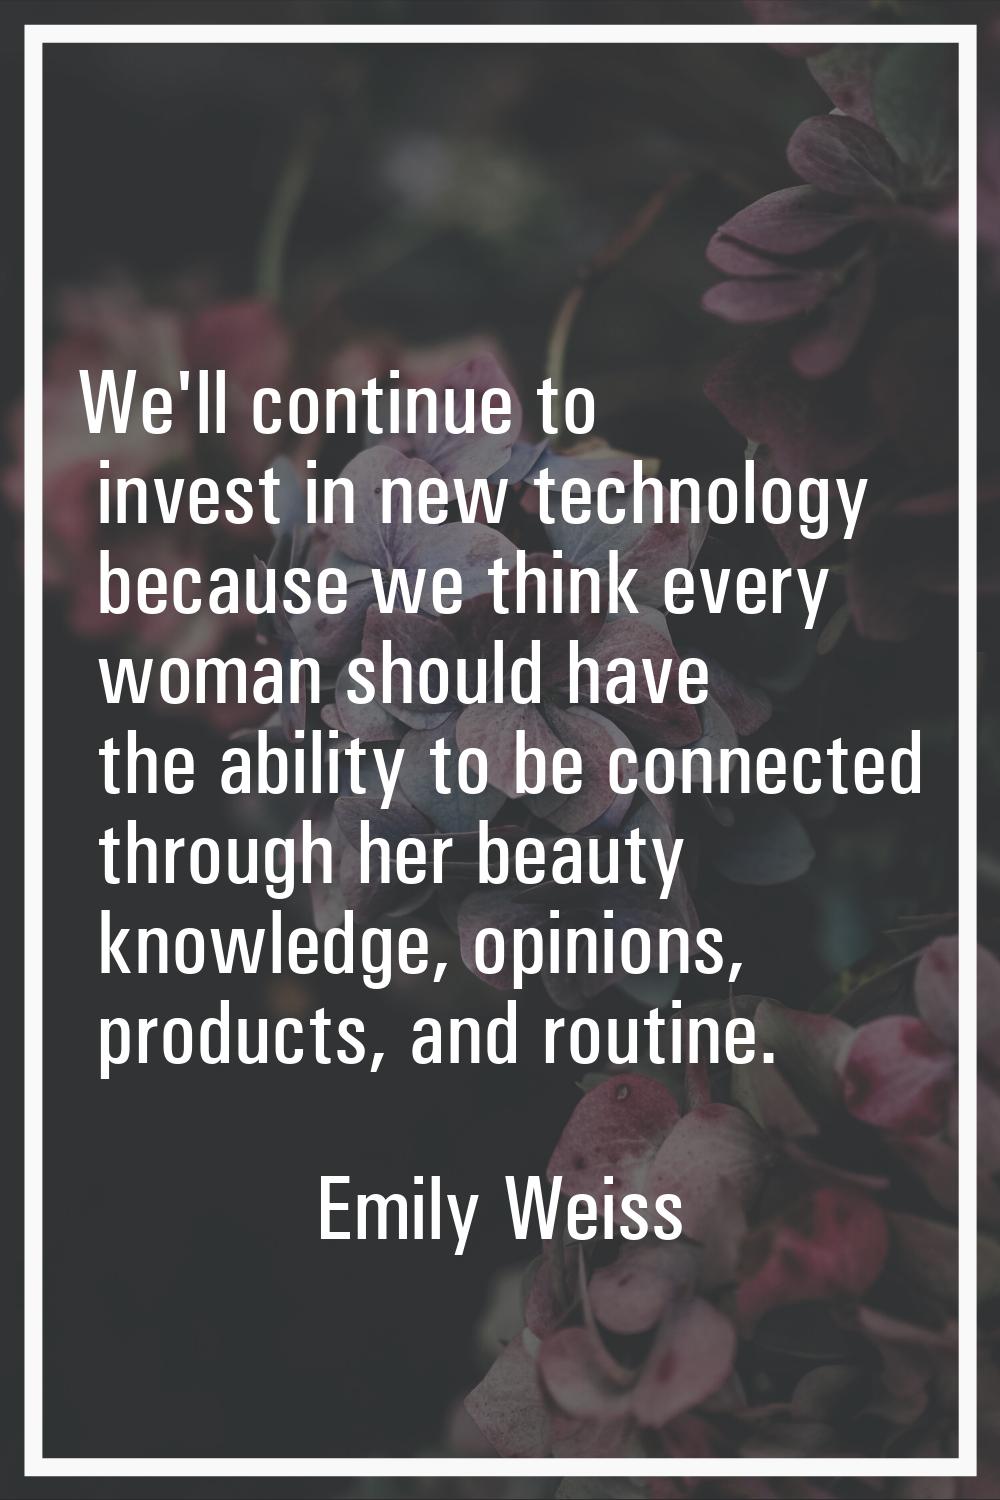 We'll continue to invest in new technology because we think every woman should have the ability to 